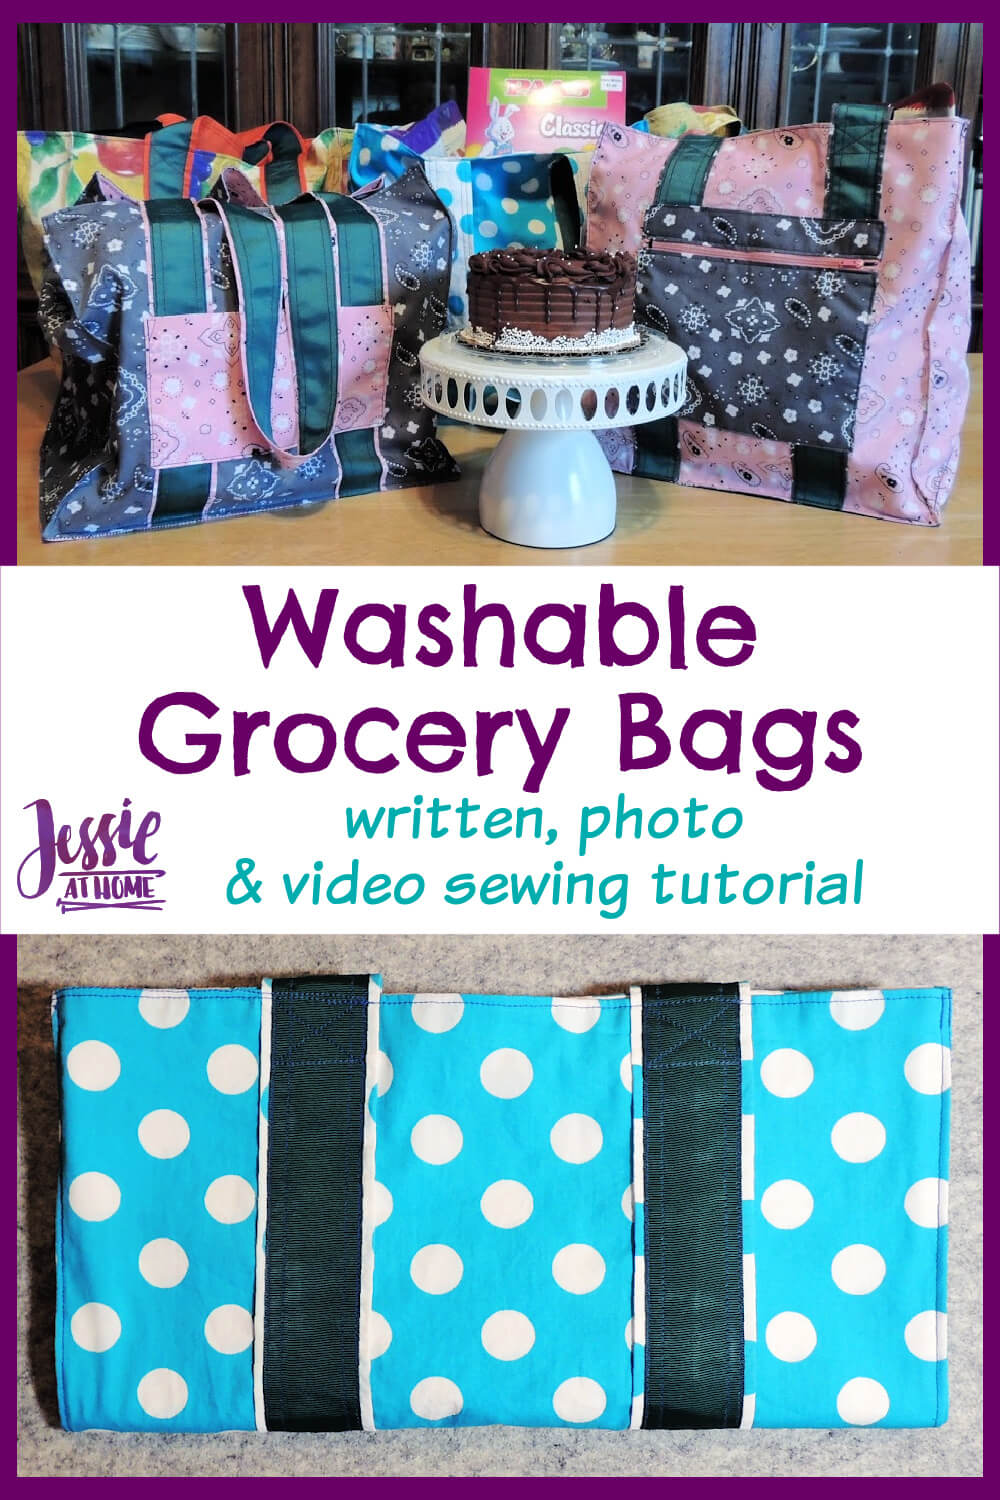 Washable Grocery Bags Sewing Tutorial - Shop with Style